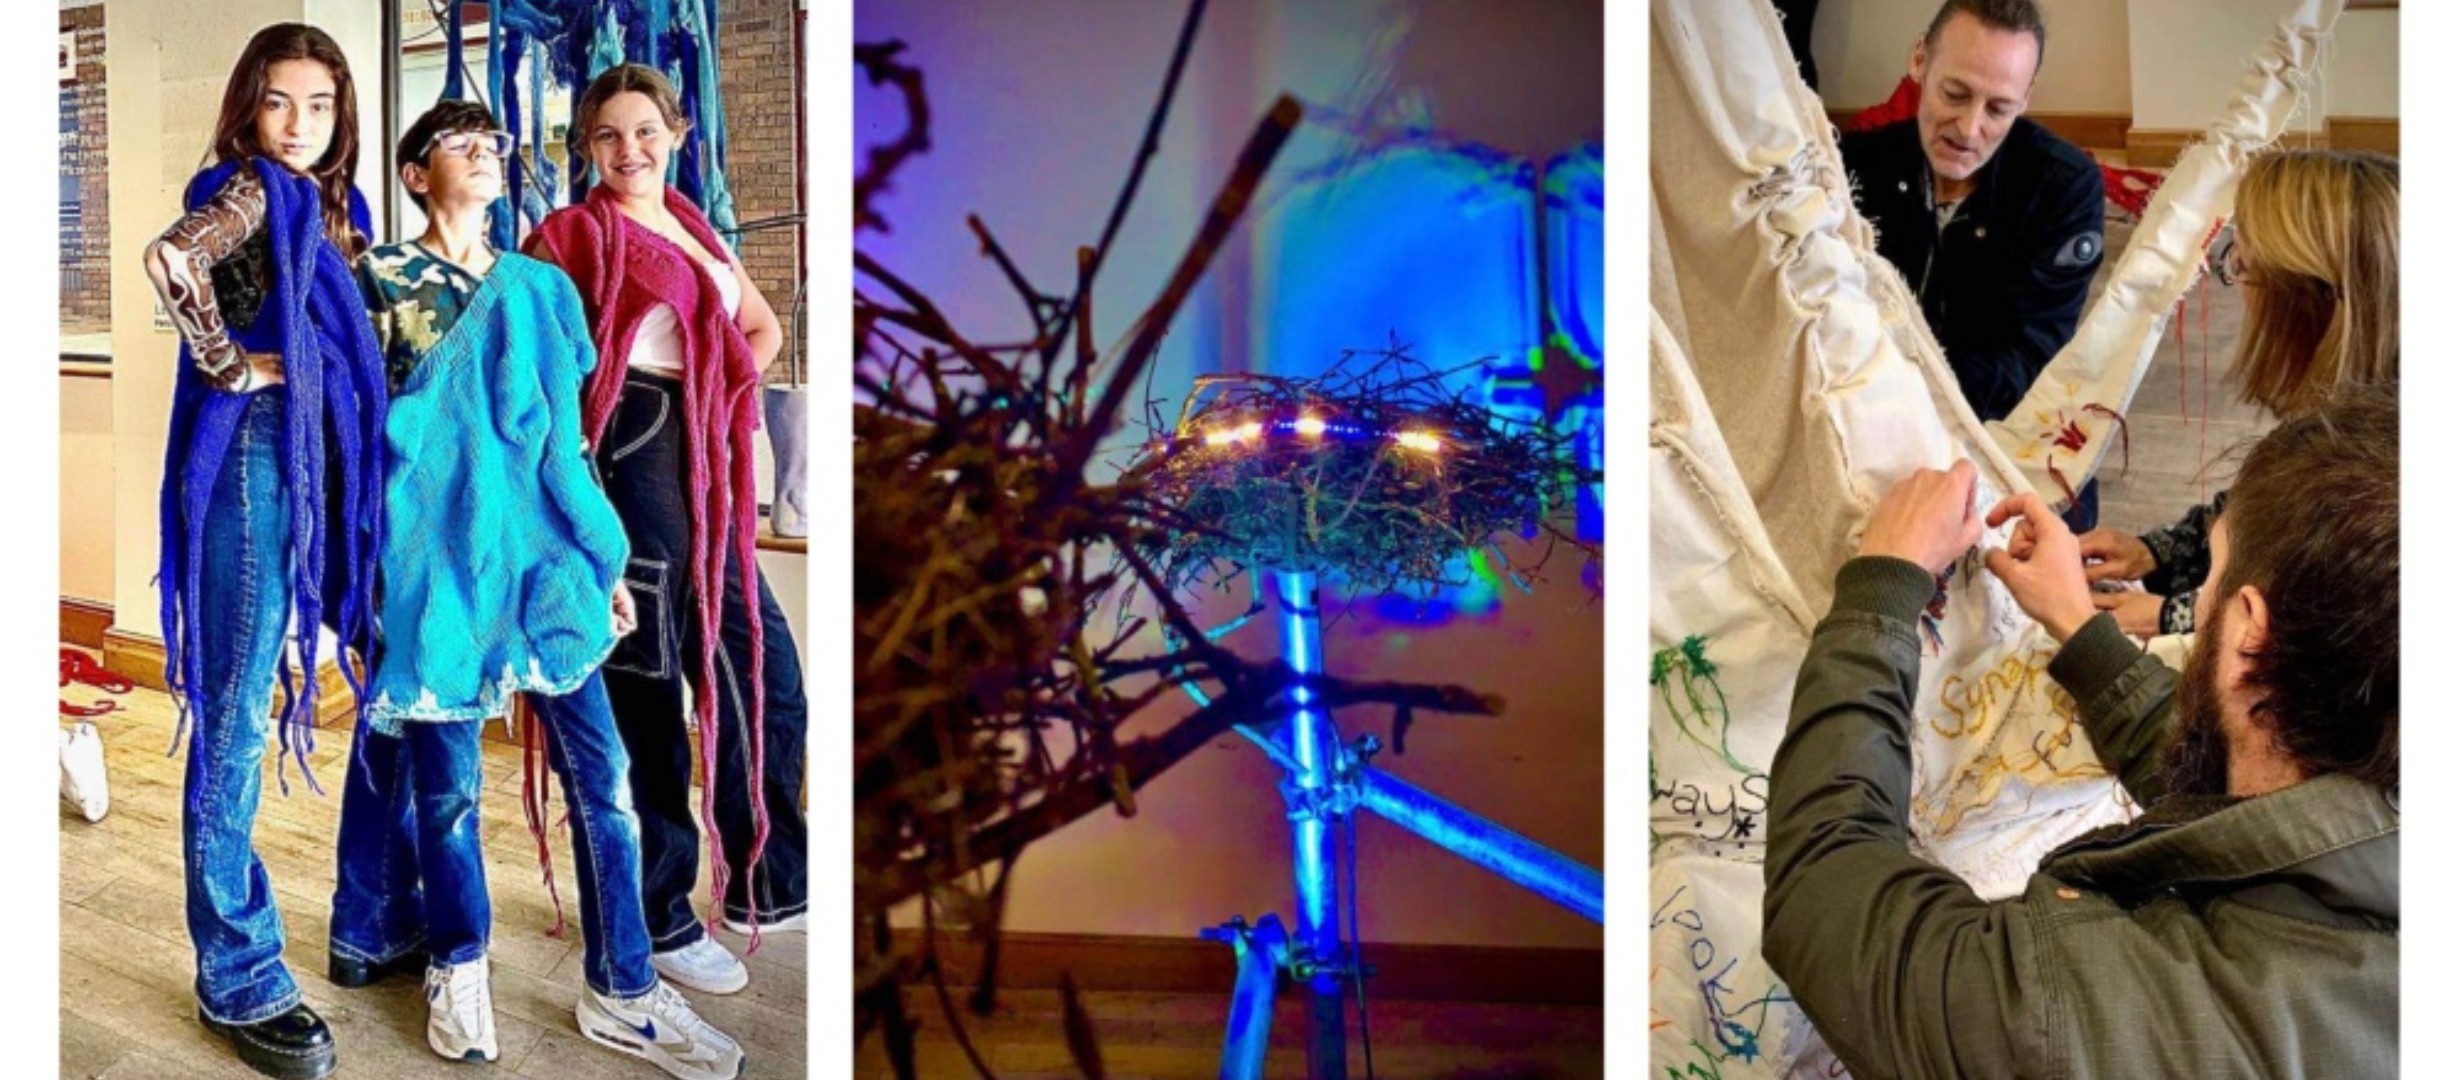 3 photos: people wearing crafted garments; nest of twigs with lights, people stitching onto canvas